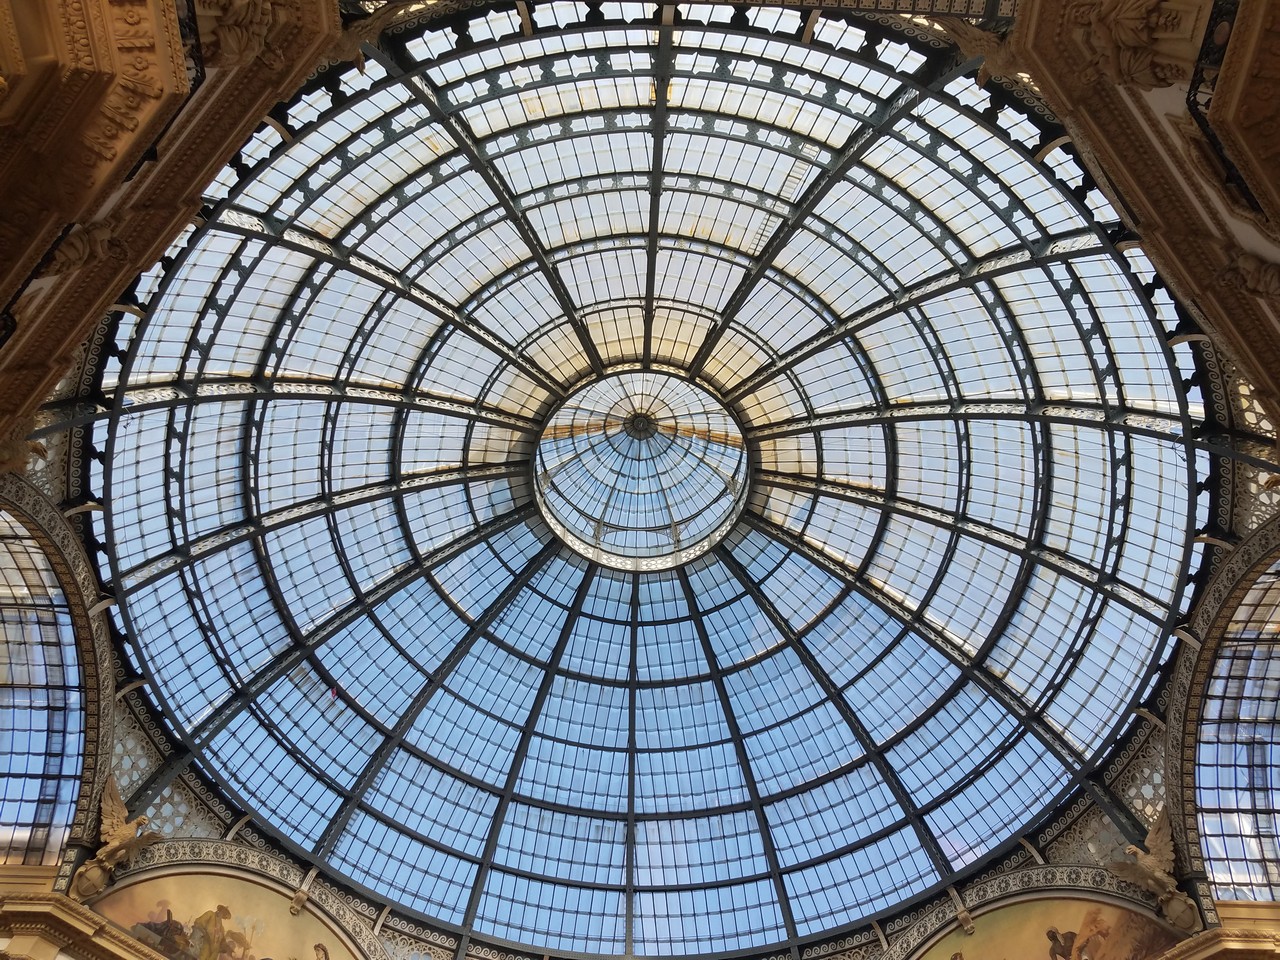 a glass dome with a circular roof